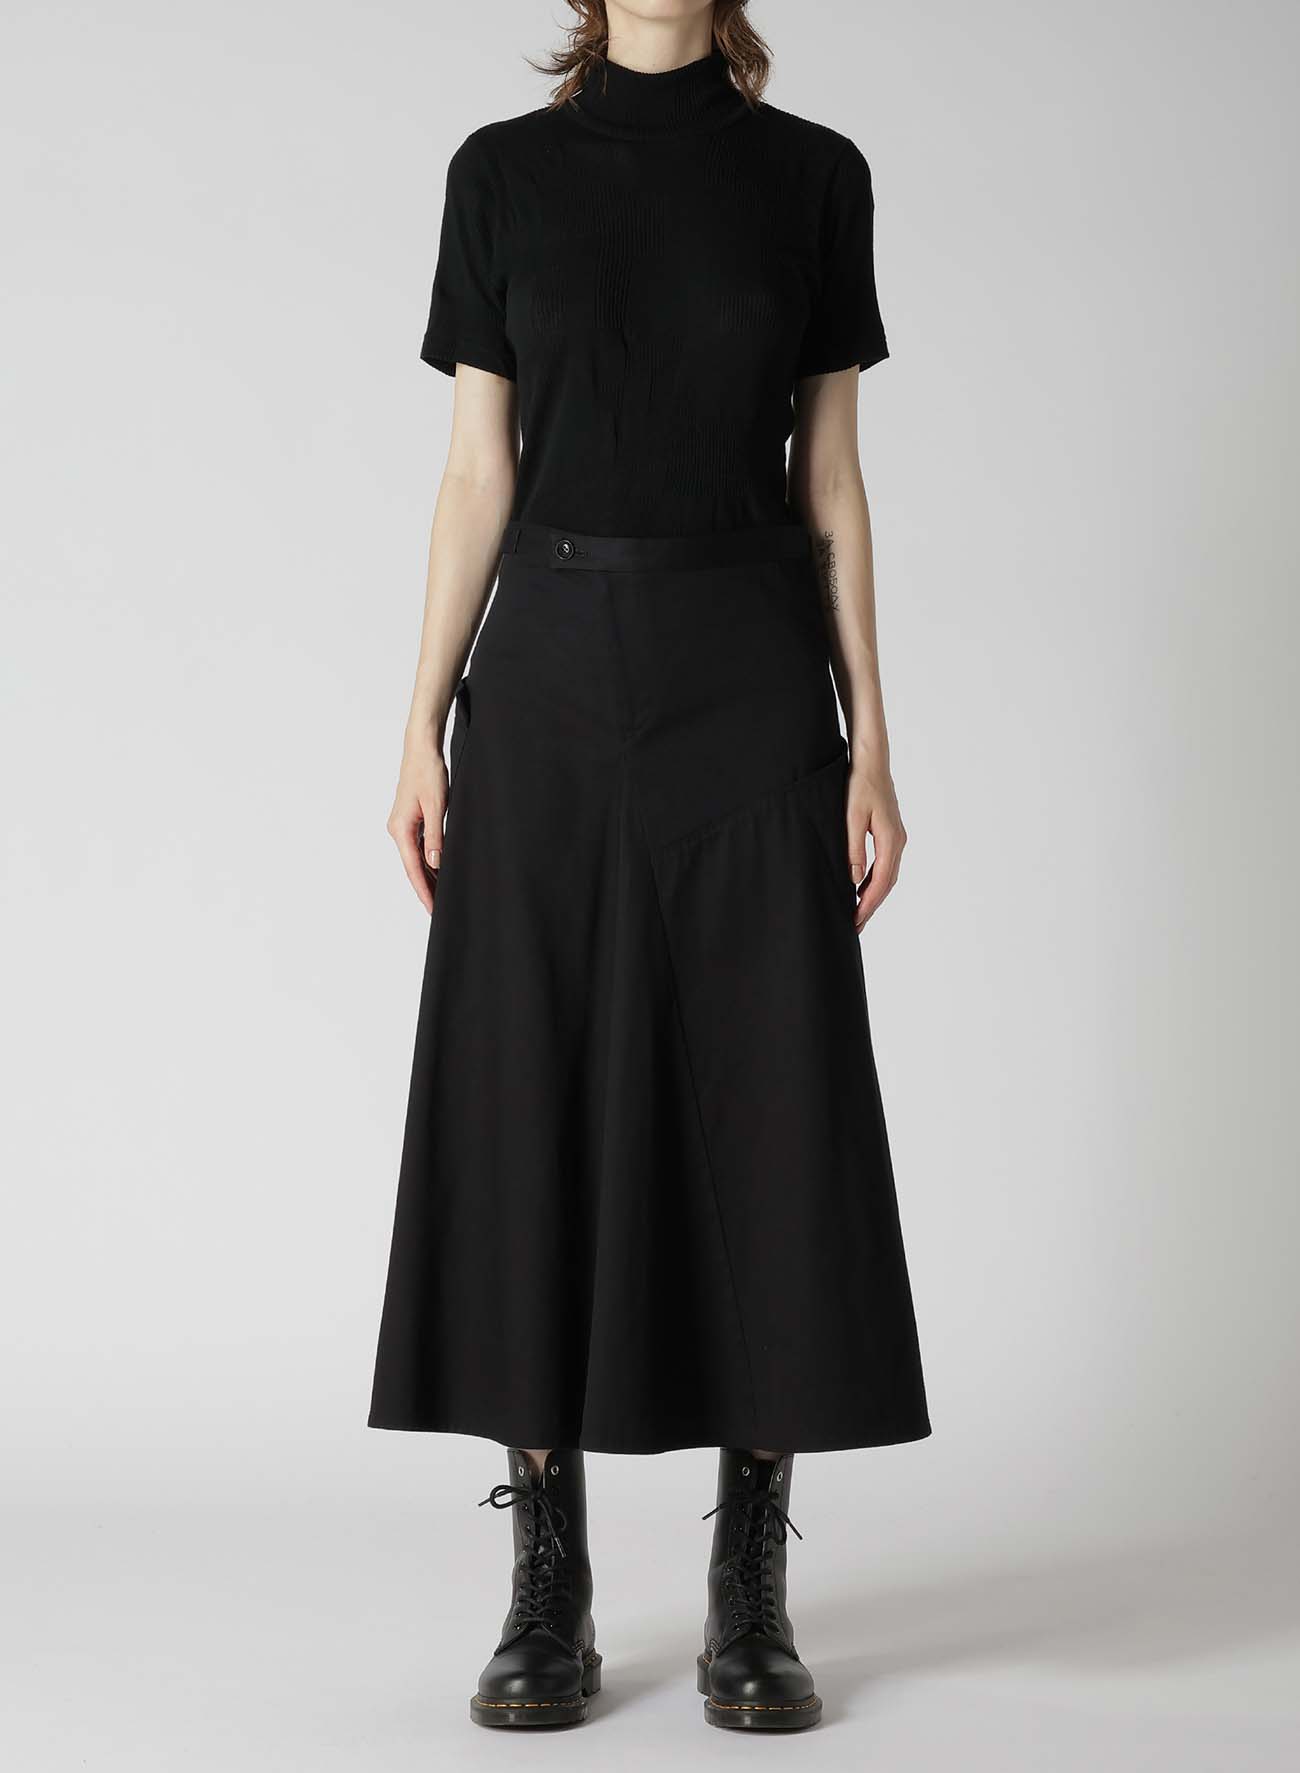 [Y's BORN PRODUCT] COTTON TWILL FLARE GUSSET FLARE SKIRT